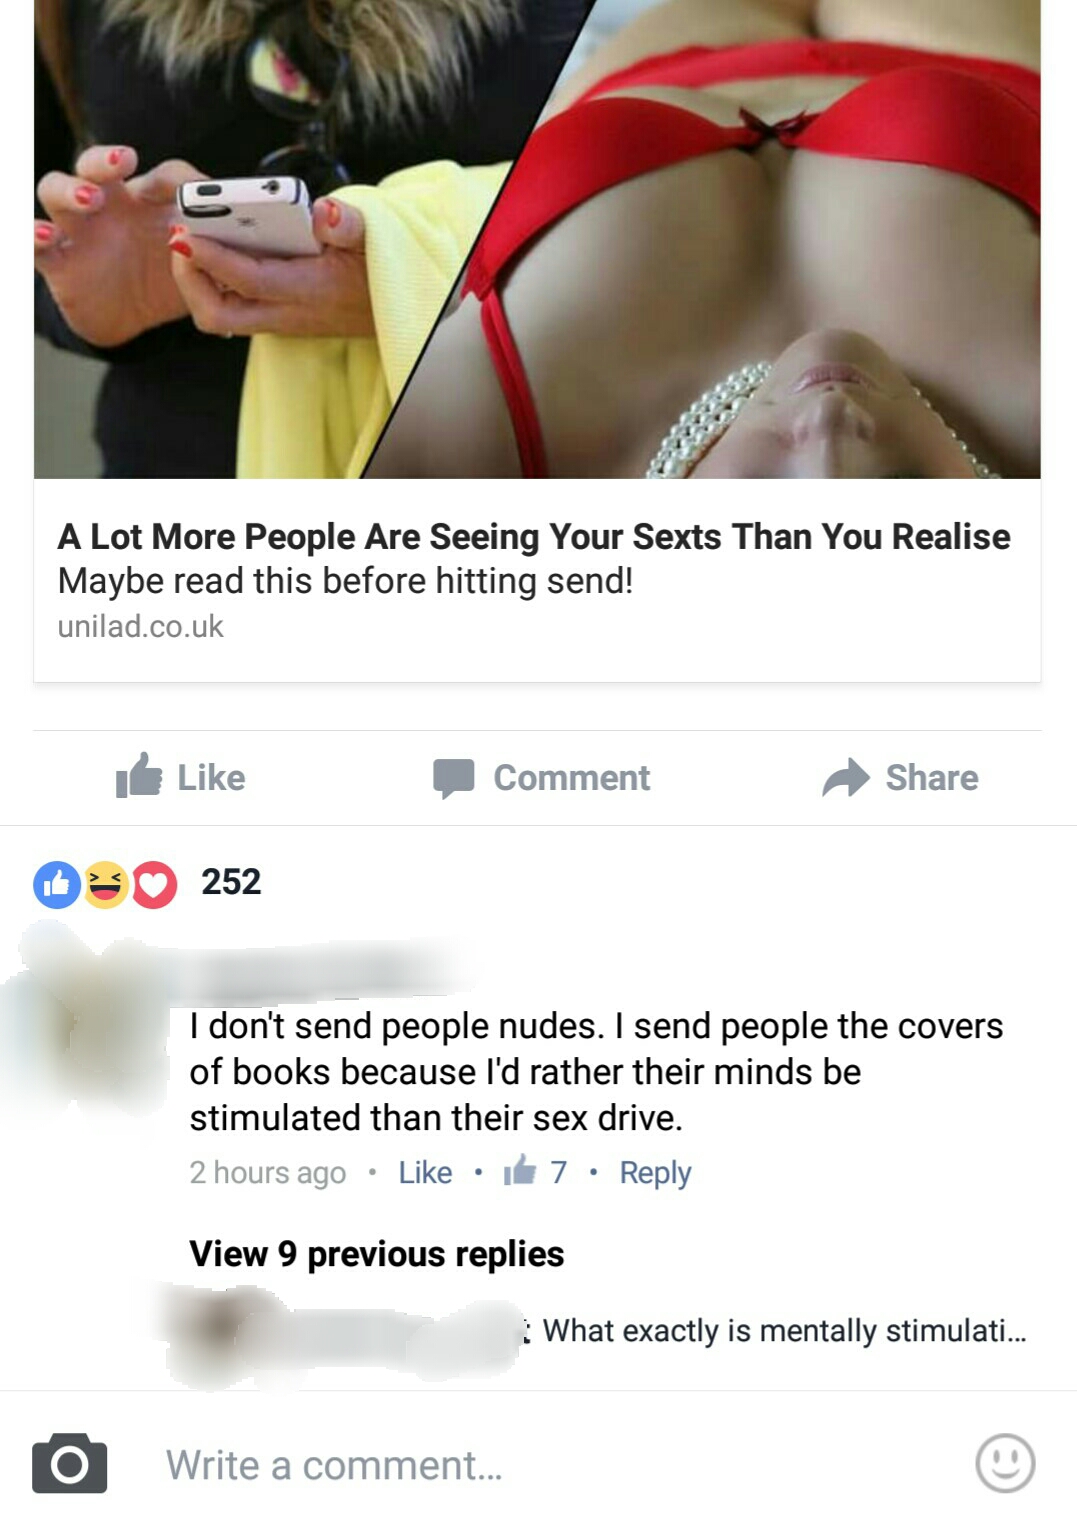 cringe arm - A Lot More People Are Seeing Your Sexts Than You Realise Maybe read this before hitting send! unilad.co.uk Comment 0 252 I don't send people nudes. I send people the covers of books because I'd rather their minds be stimulated than their sex 